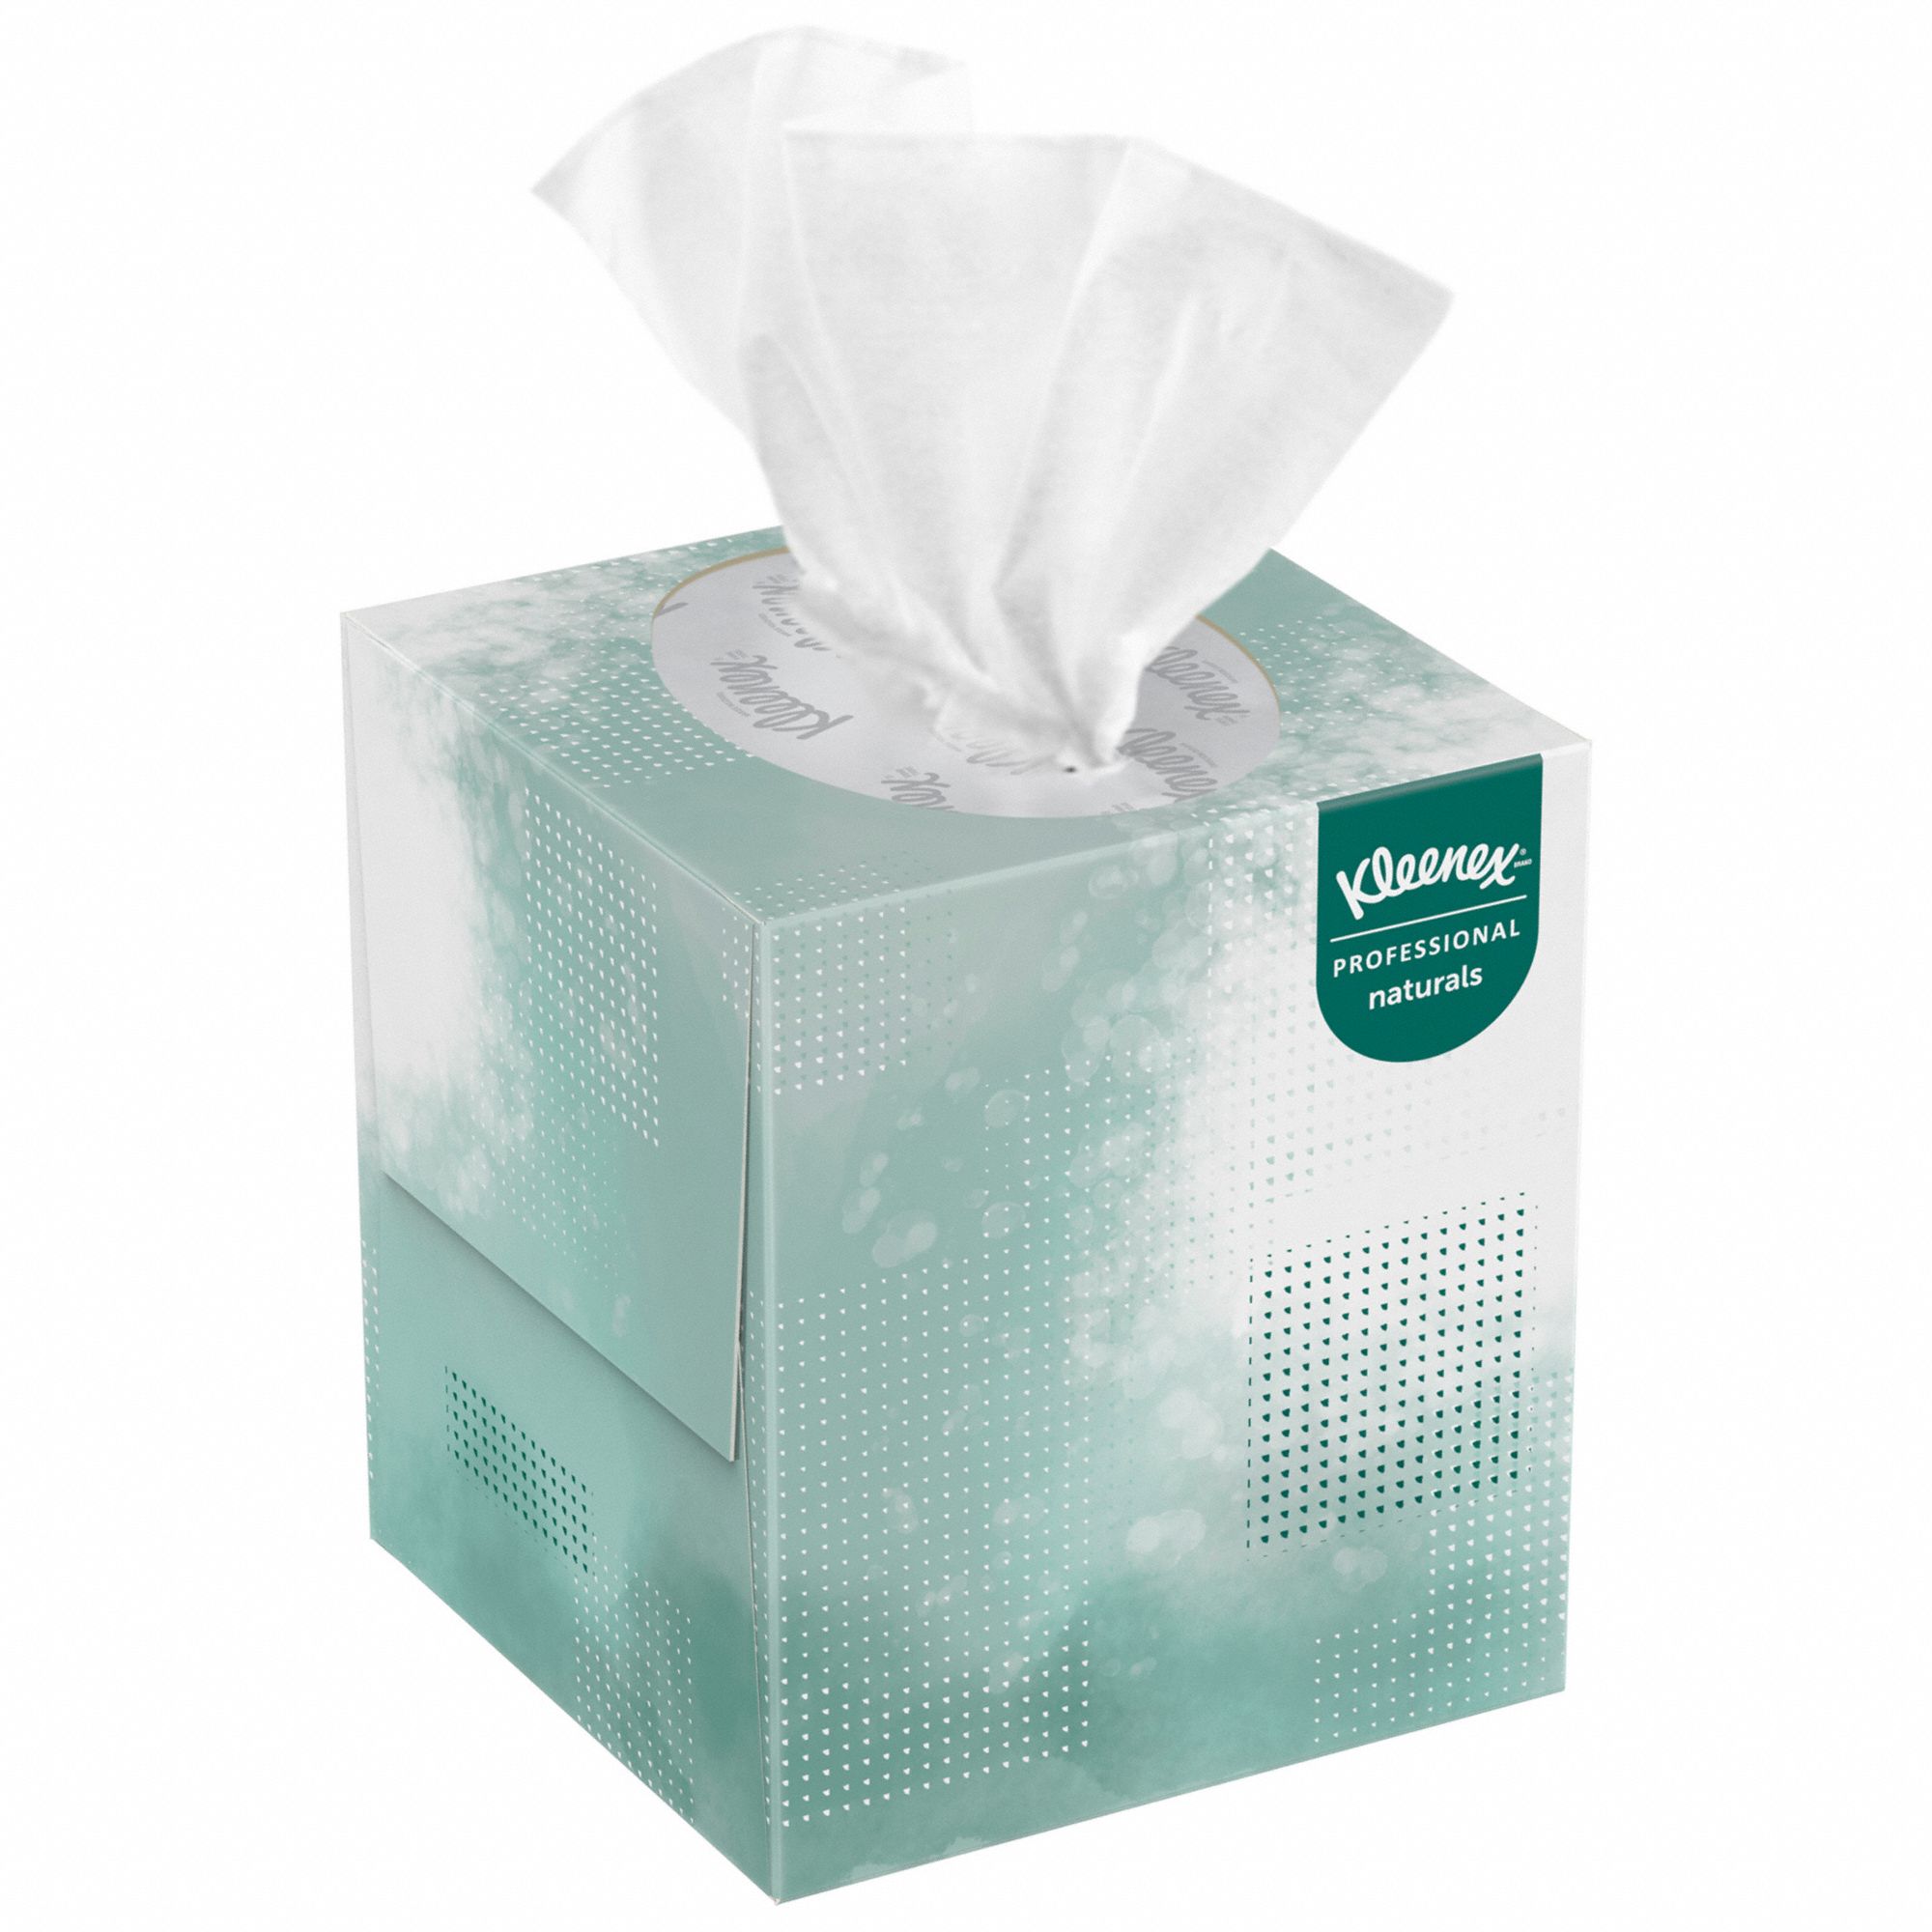 Facial Tissue: Cube, Kleenex® Naturals, 8 1⁄4 in x 7 3⁄4 in Sheet Size, 90 Sheets, 36 PK